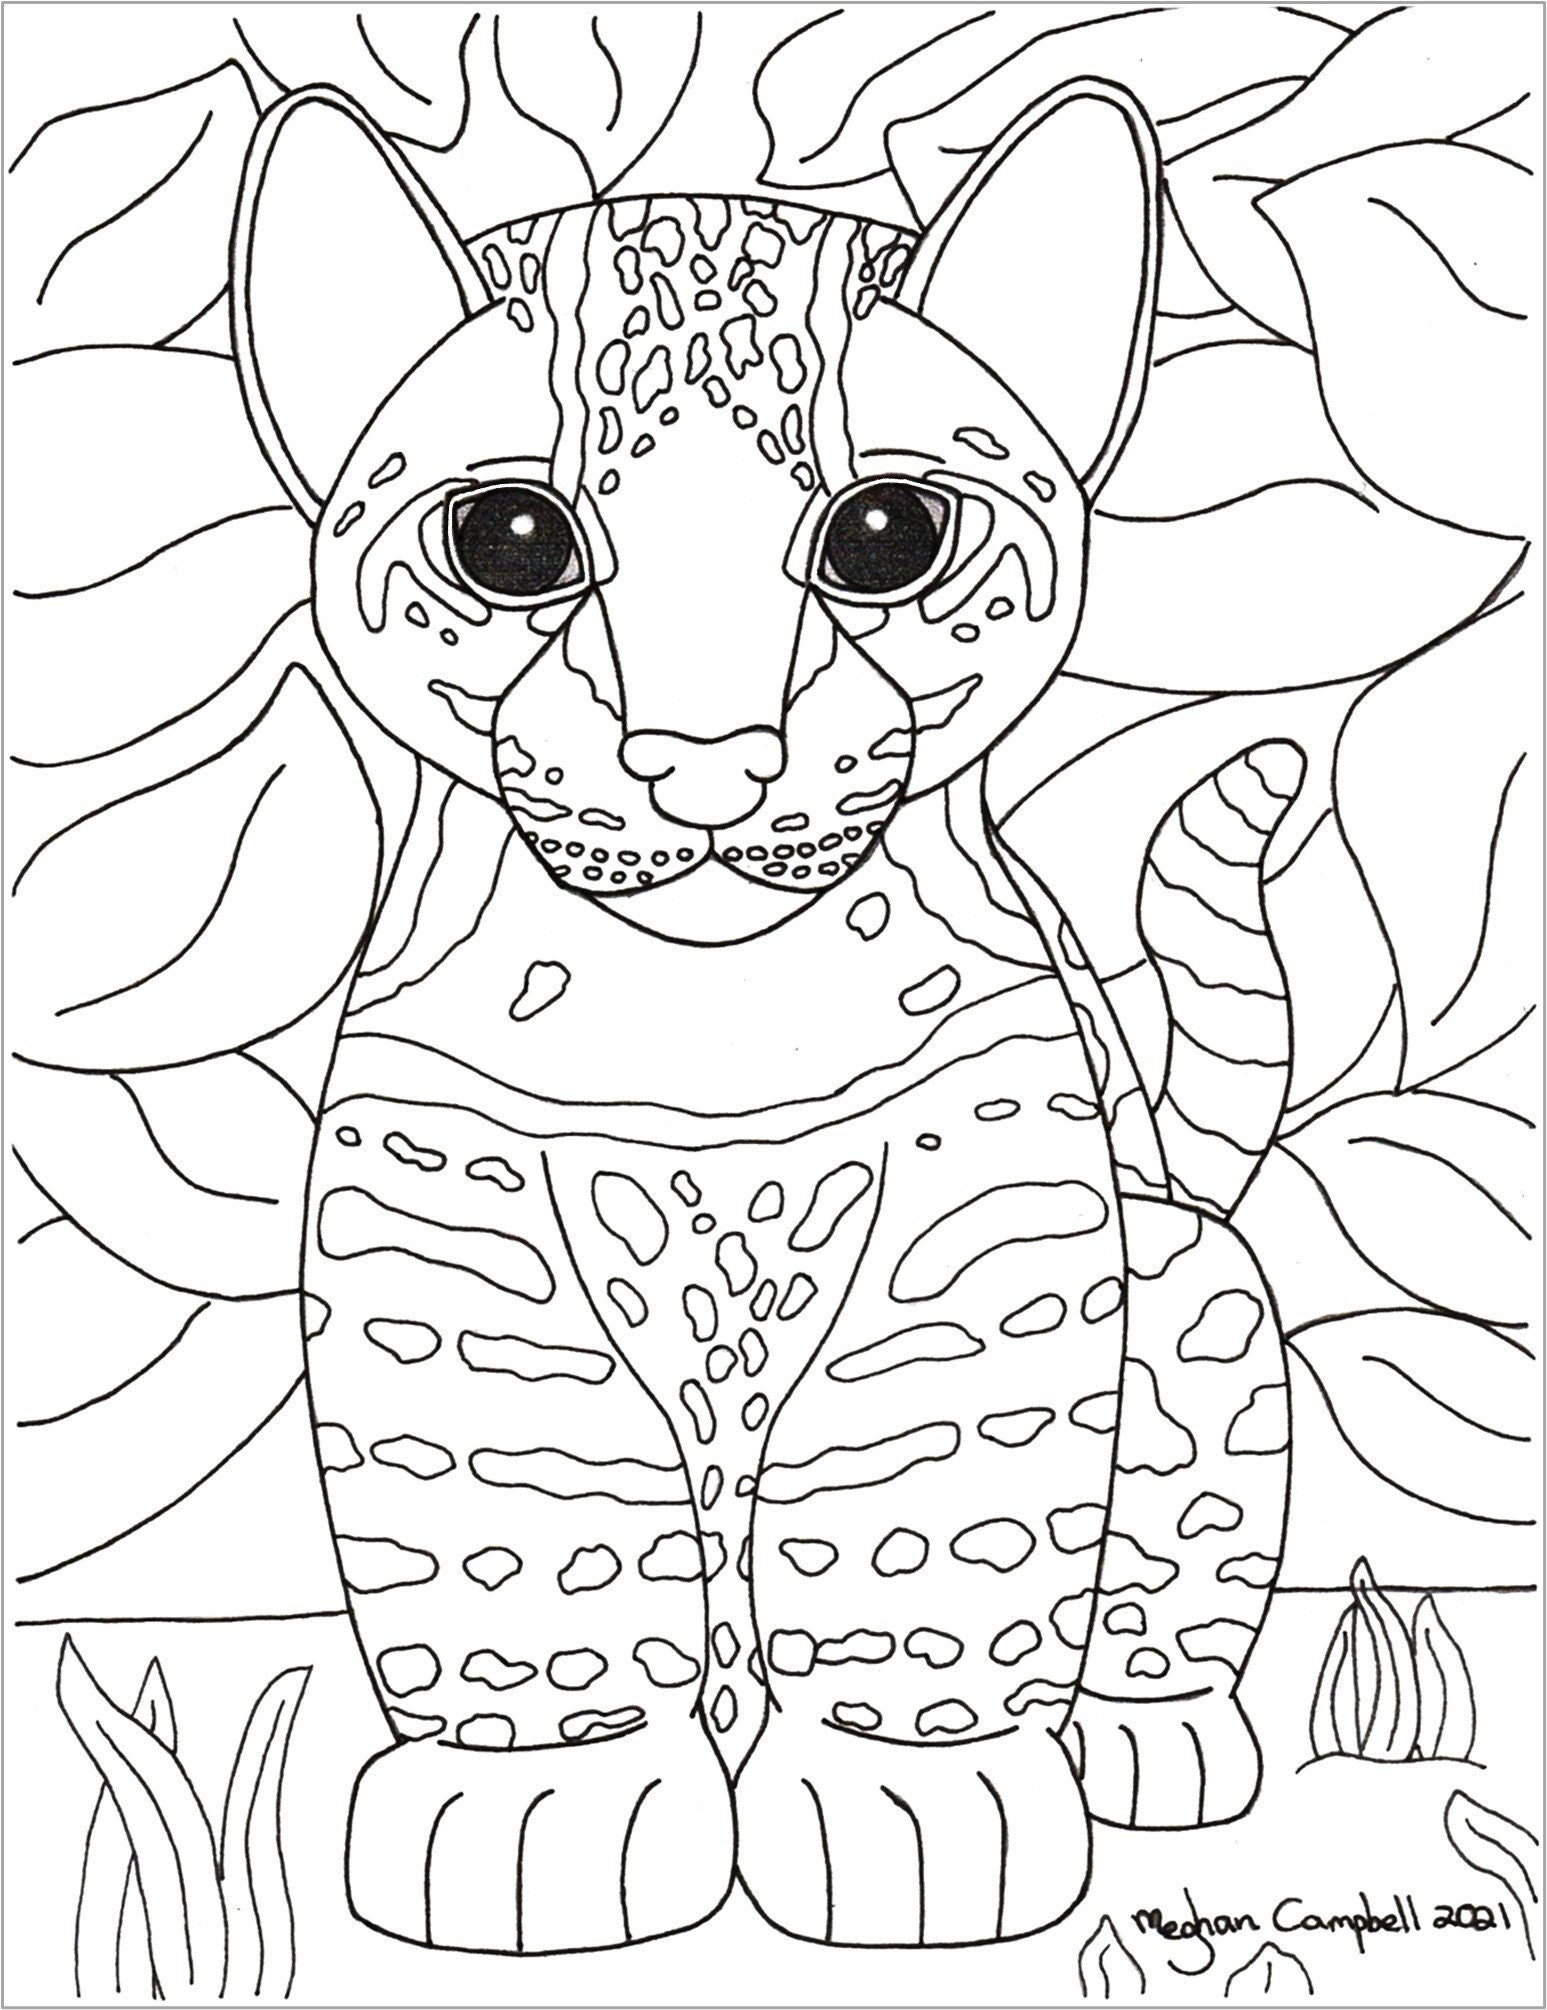 Ocelot baby printable coloring page